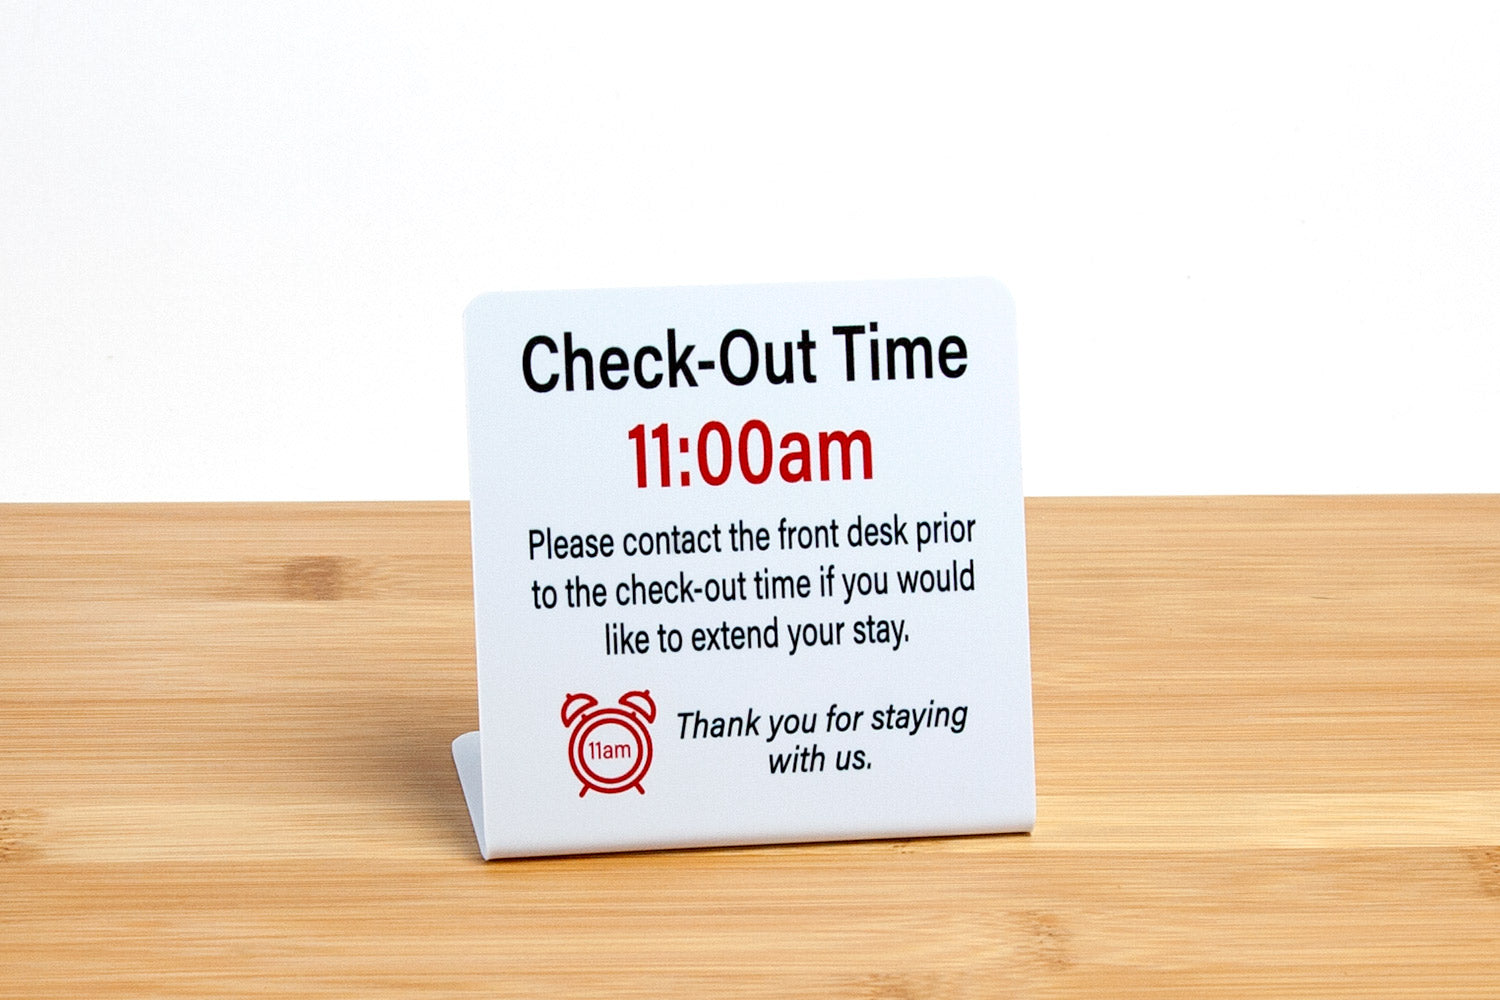 Check-out time is 11:00am hotel guest room signs are easy to display on counters and tables. These L style plastic signs are ideal for any hotel guest room.